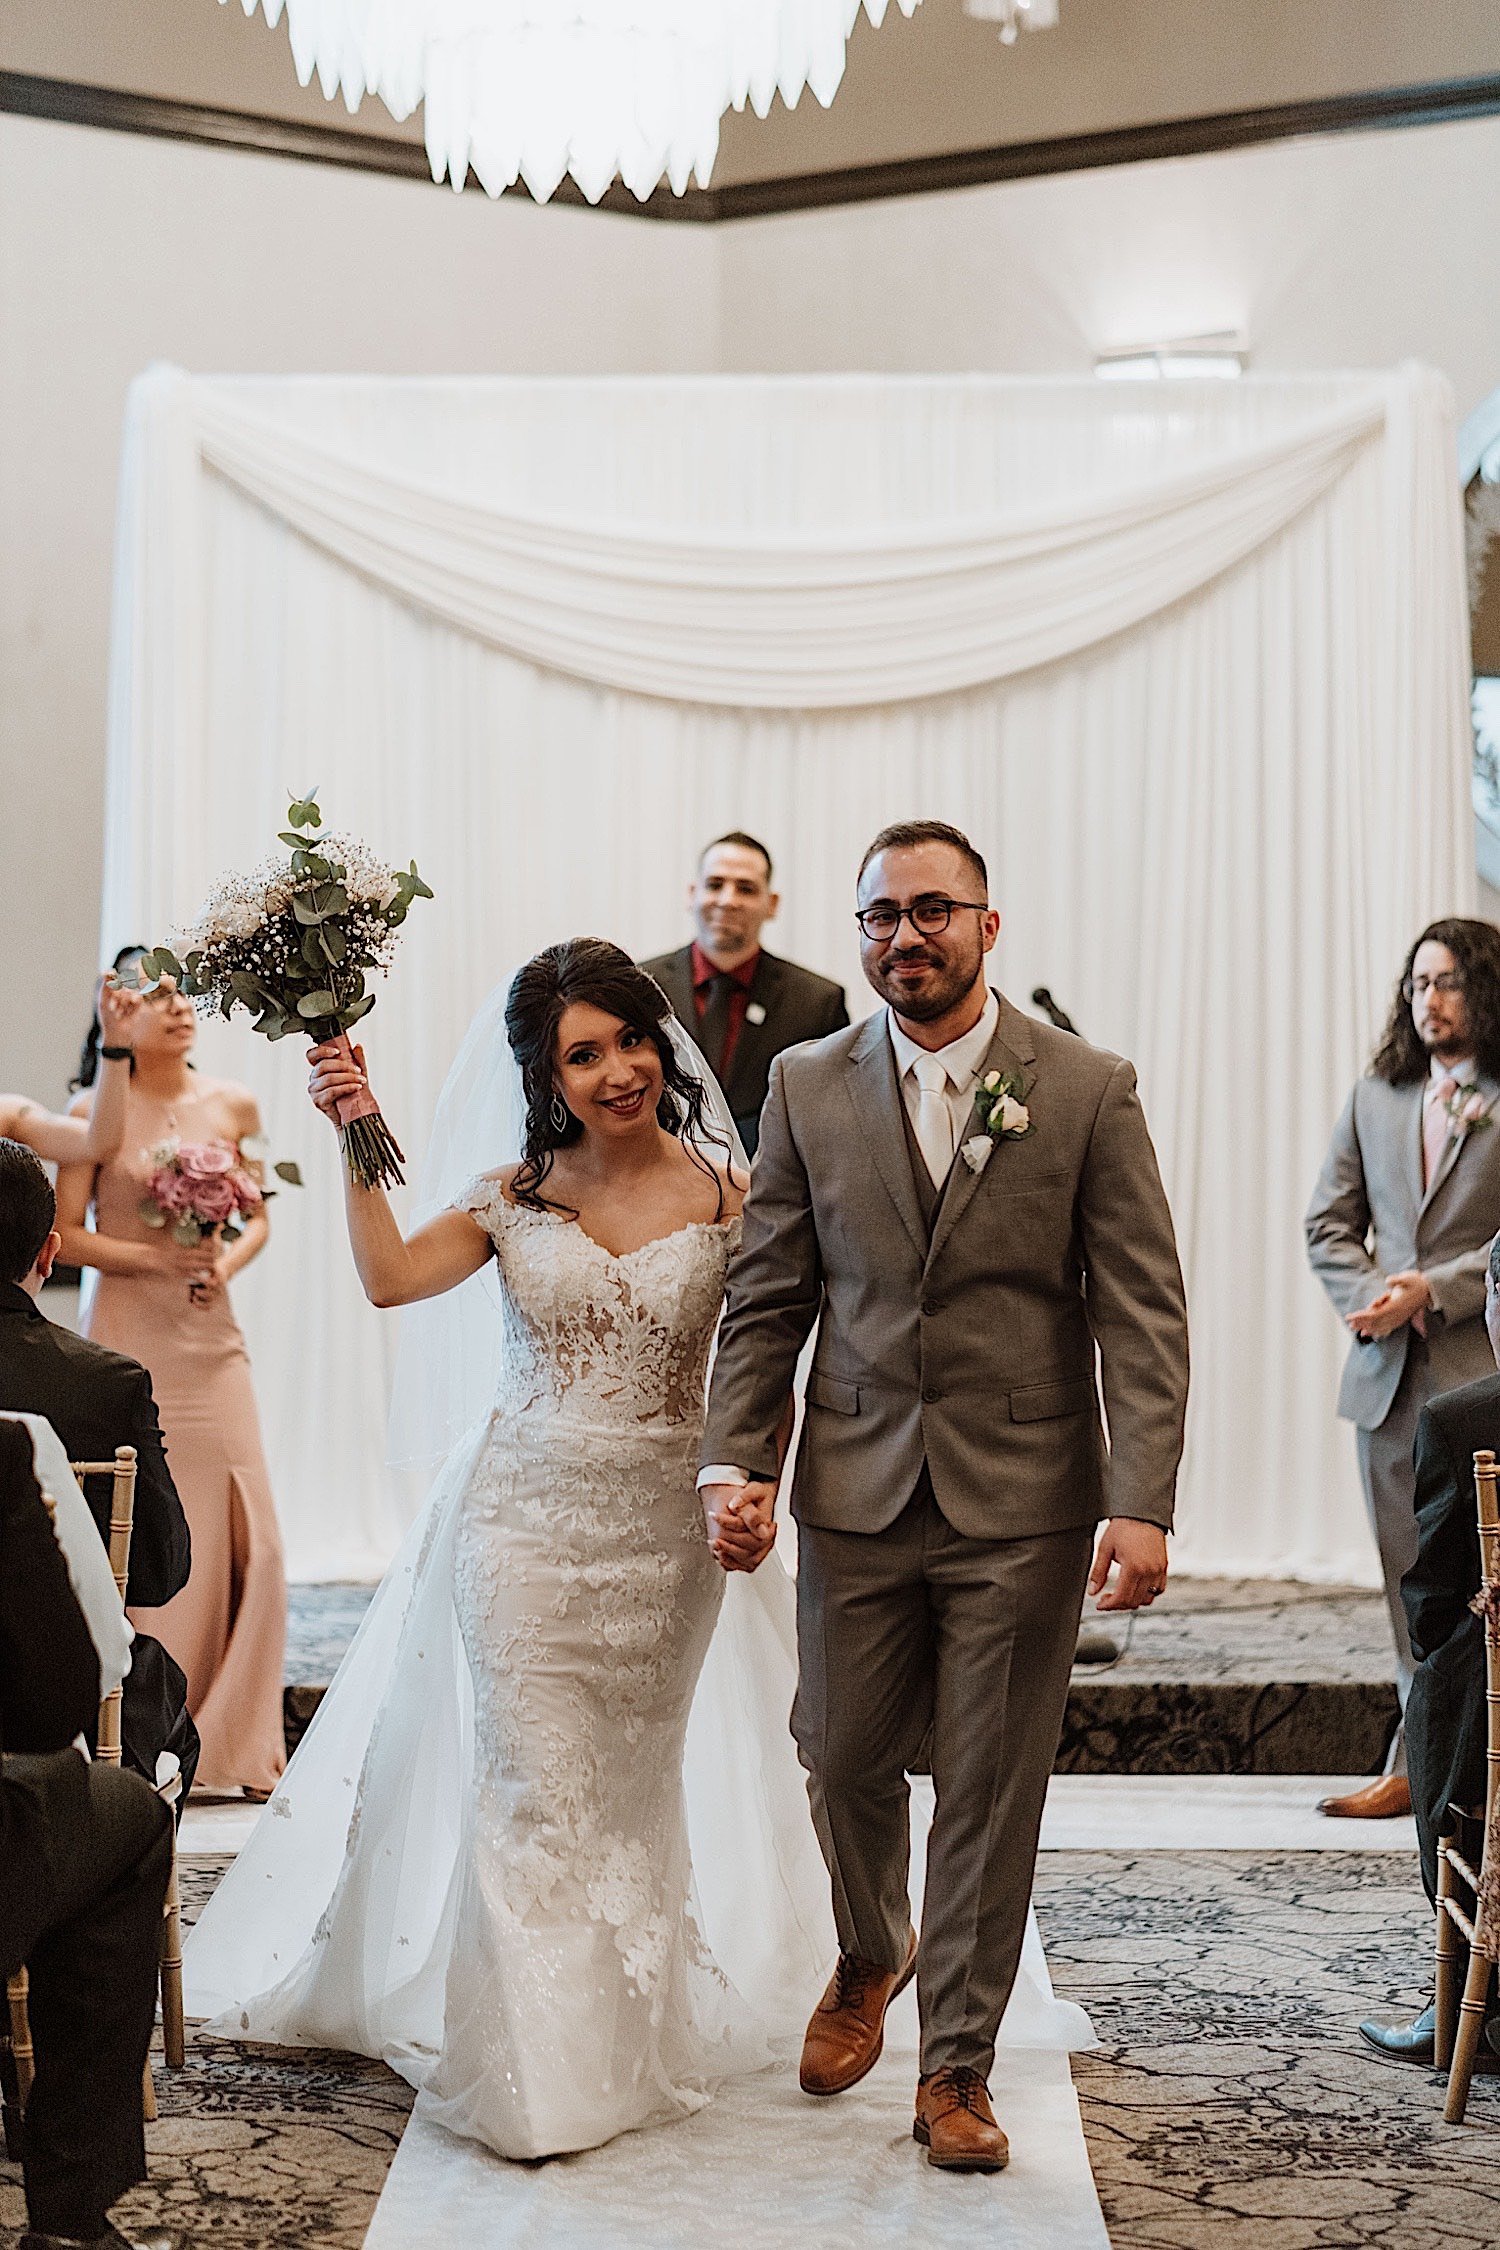 Bride and groom walk down the aisle of their Chicagoland ballroom wedding after officially being married